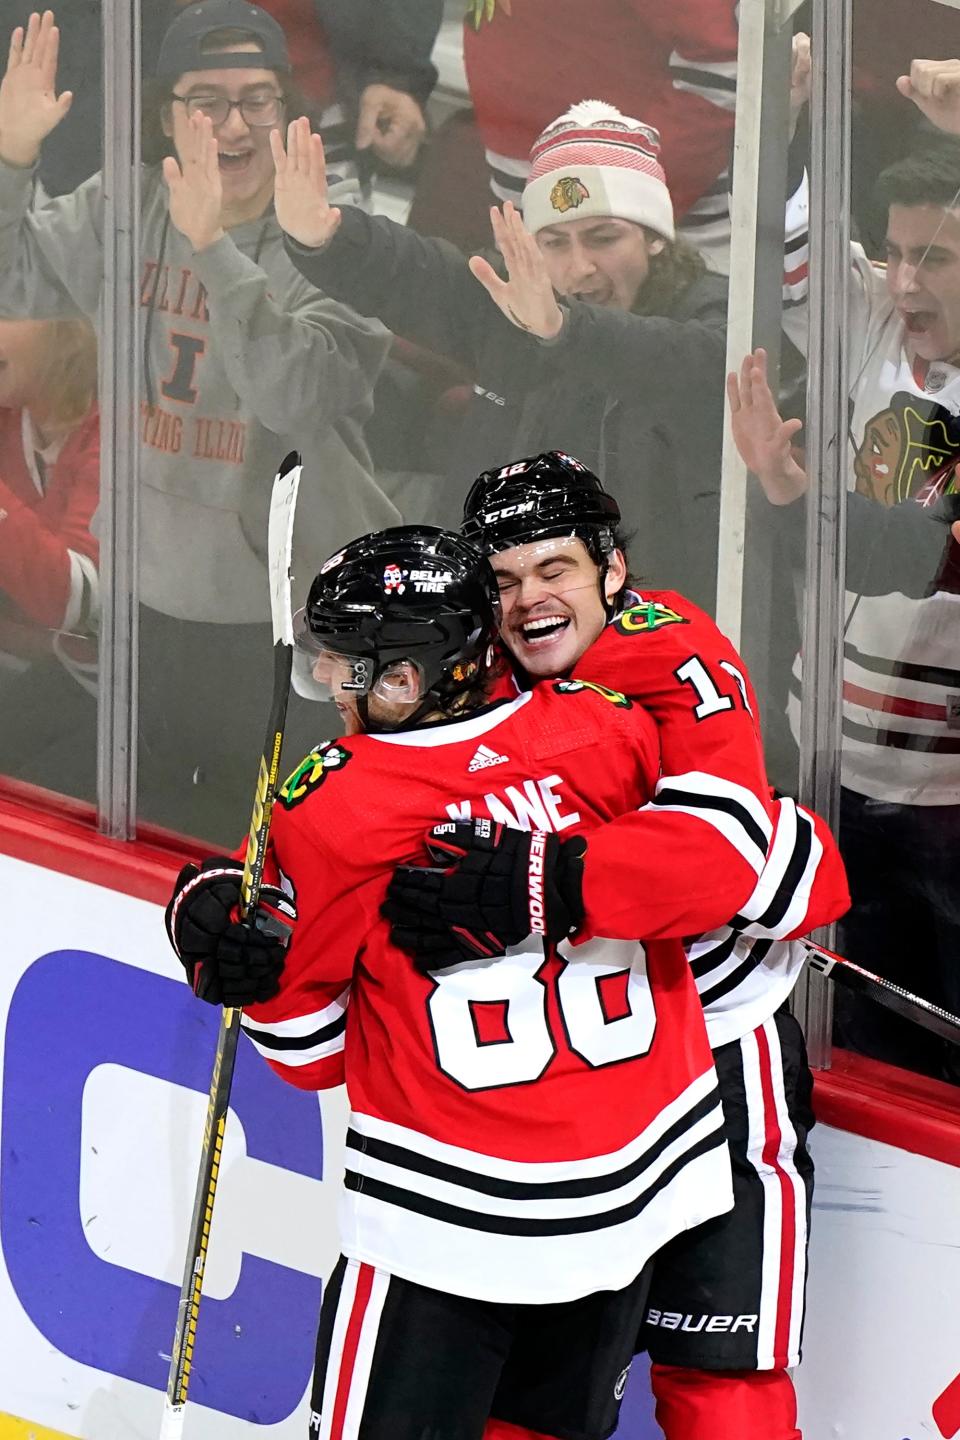 Chicago Blackhawks left wing Alex DeBrincat, right, celebrates with right wing Patrick Kane after scoring the game-winning goal against the St. Louis Blues during an overtime period of an NHL hockey game in Chicago, Friday, Nov. 26, 2021. The Chicago Blackhawks won 3-2 in overtime.(AP Photo/Nam Y. Huh)